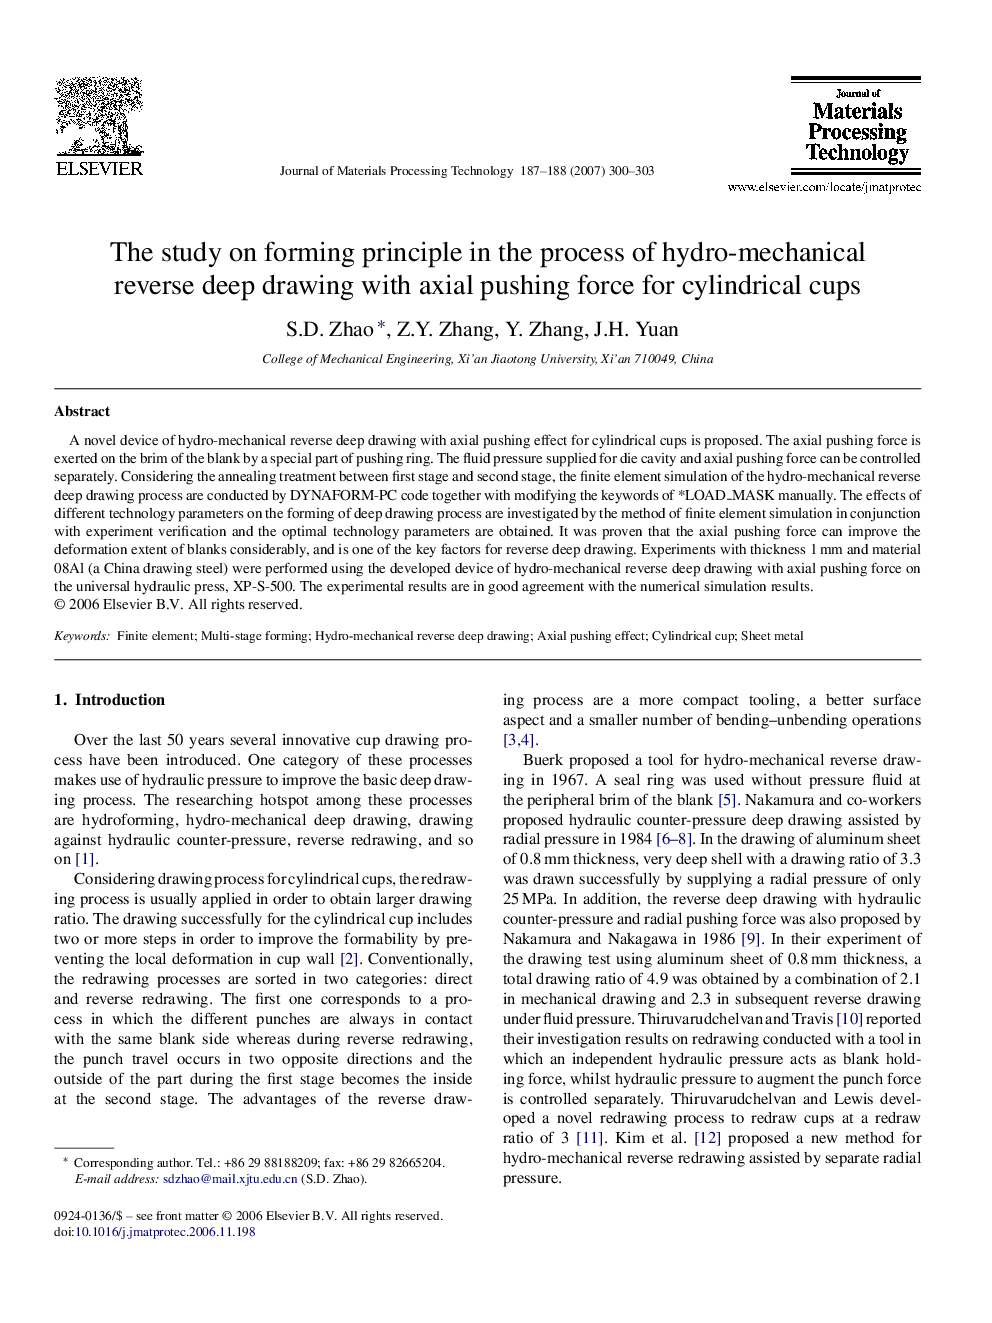 The study on forming principle in the process of hydro-mechanical reverse deep drawing with axial pushing force for cylindrical cups